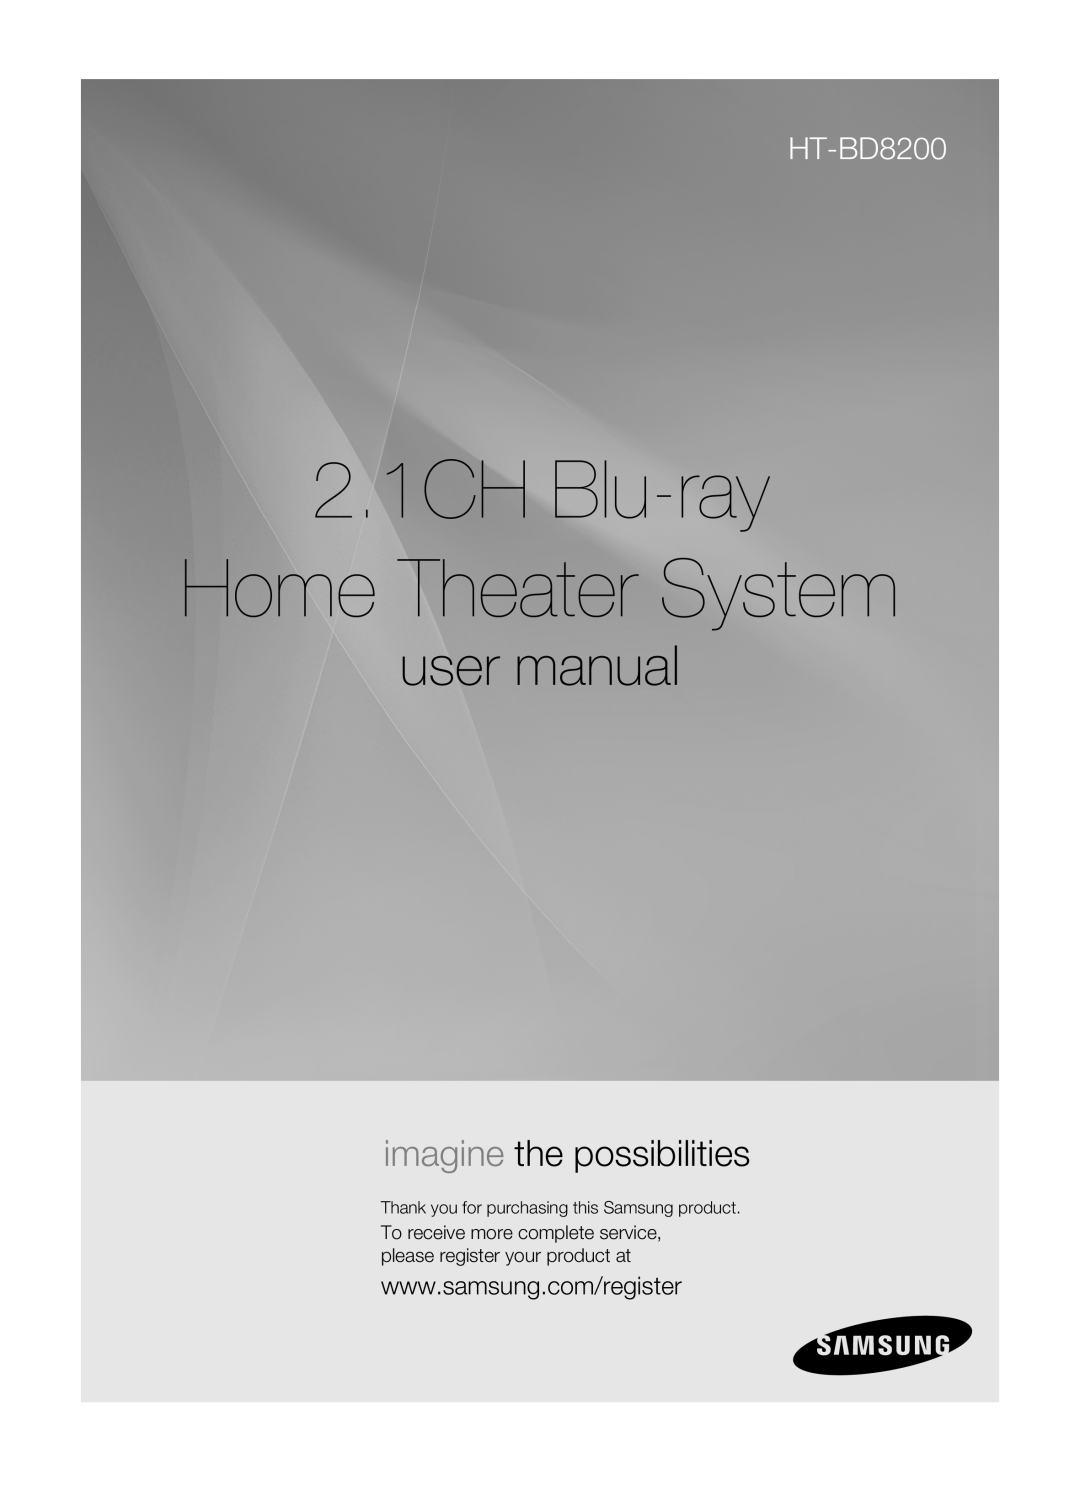 Samsung HT-BD8200 user manual 2.1CH Blu-ray Home Theater System, imagine the possibilities 